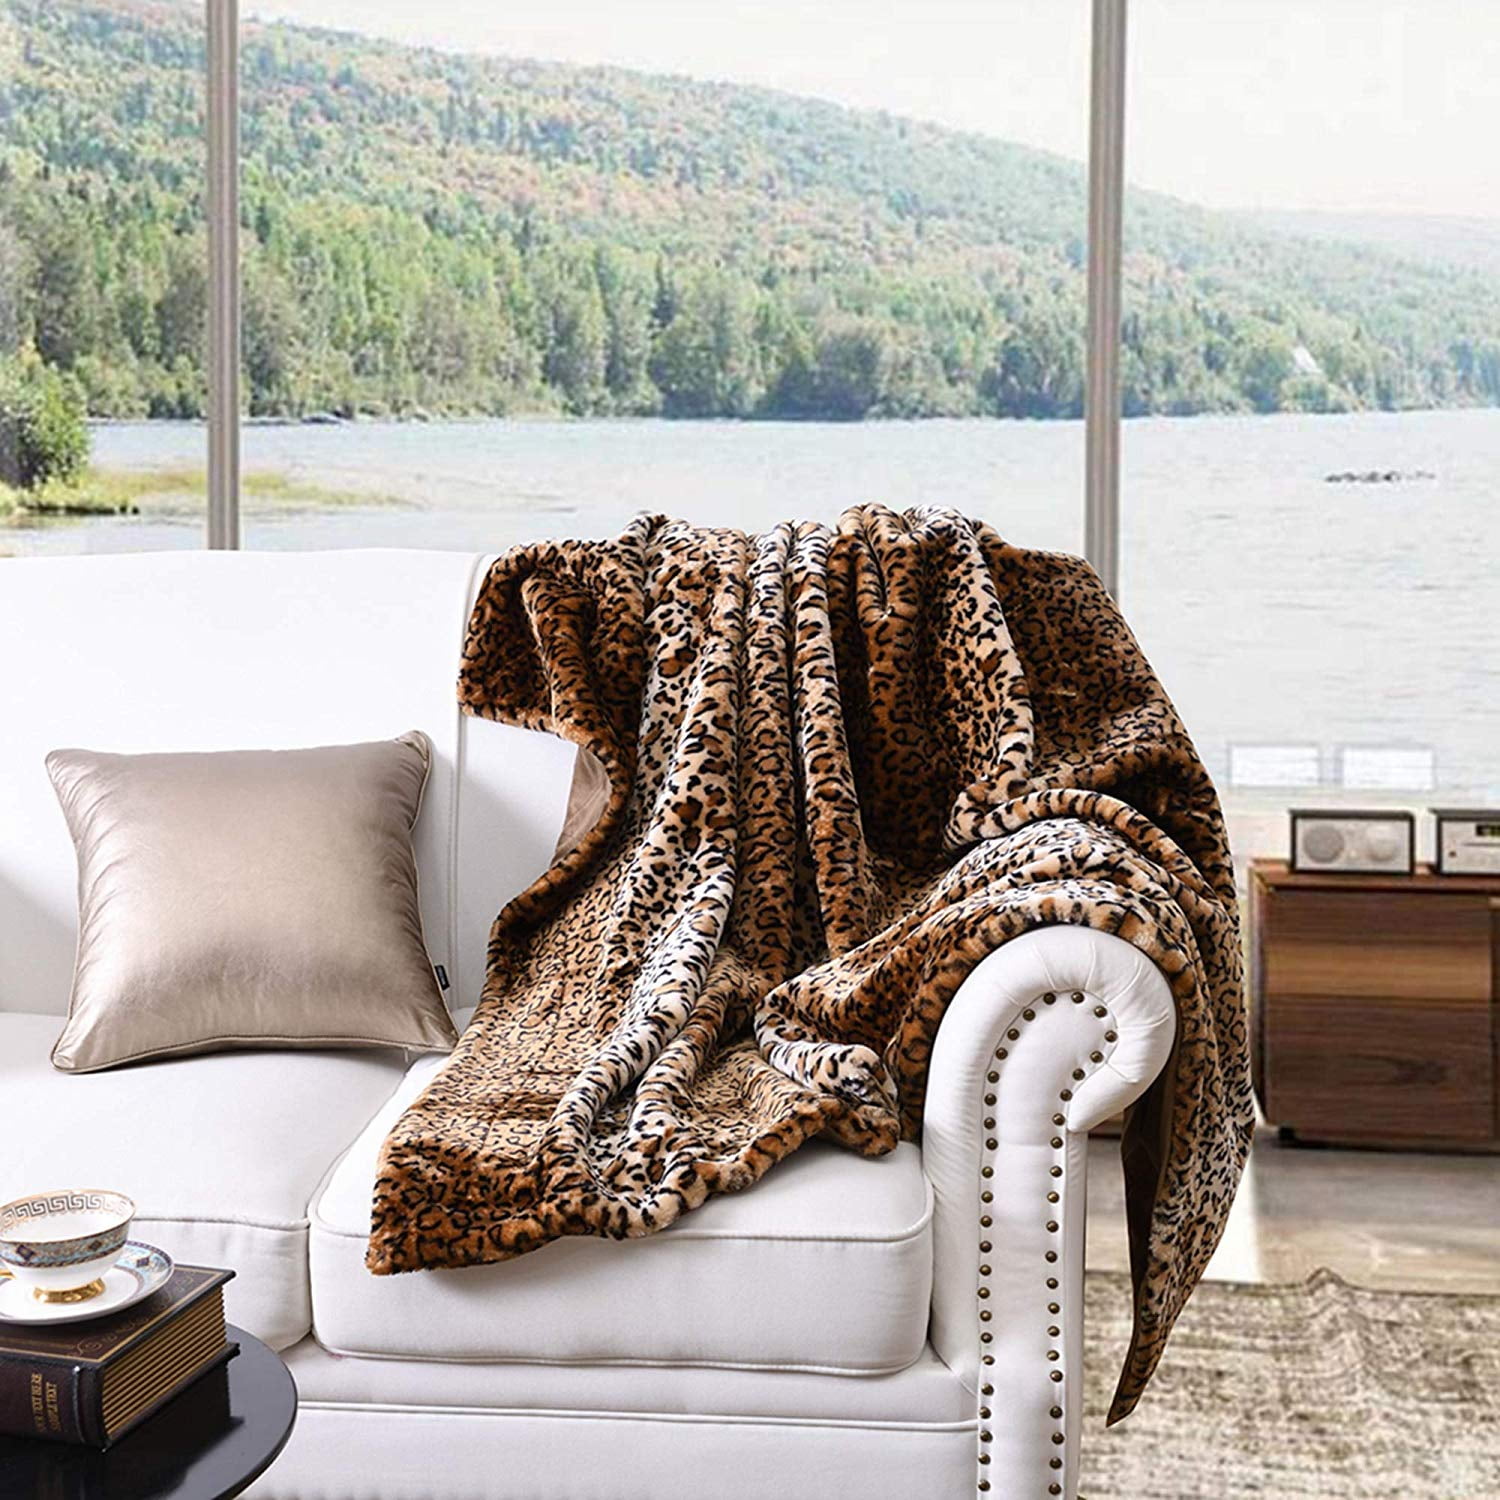 CHITA LEOPARD PRINT LUXURY BLANKET WITH SHERPA VERY SOFTY THICK AND WARM QUEEN 